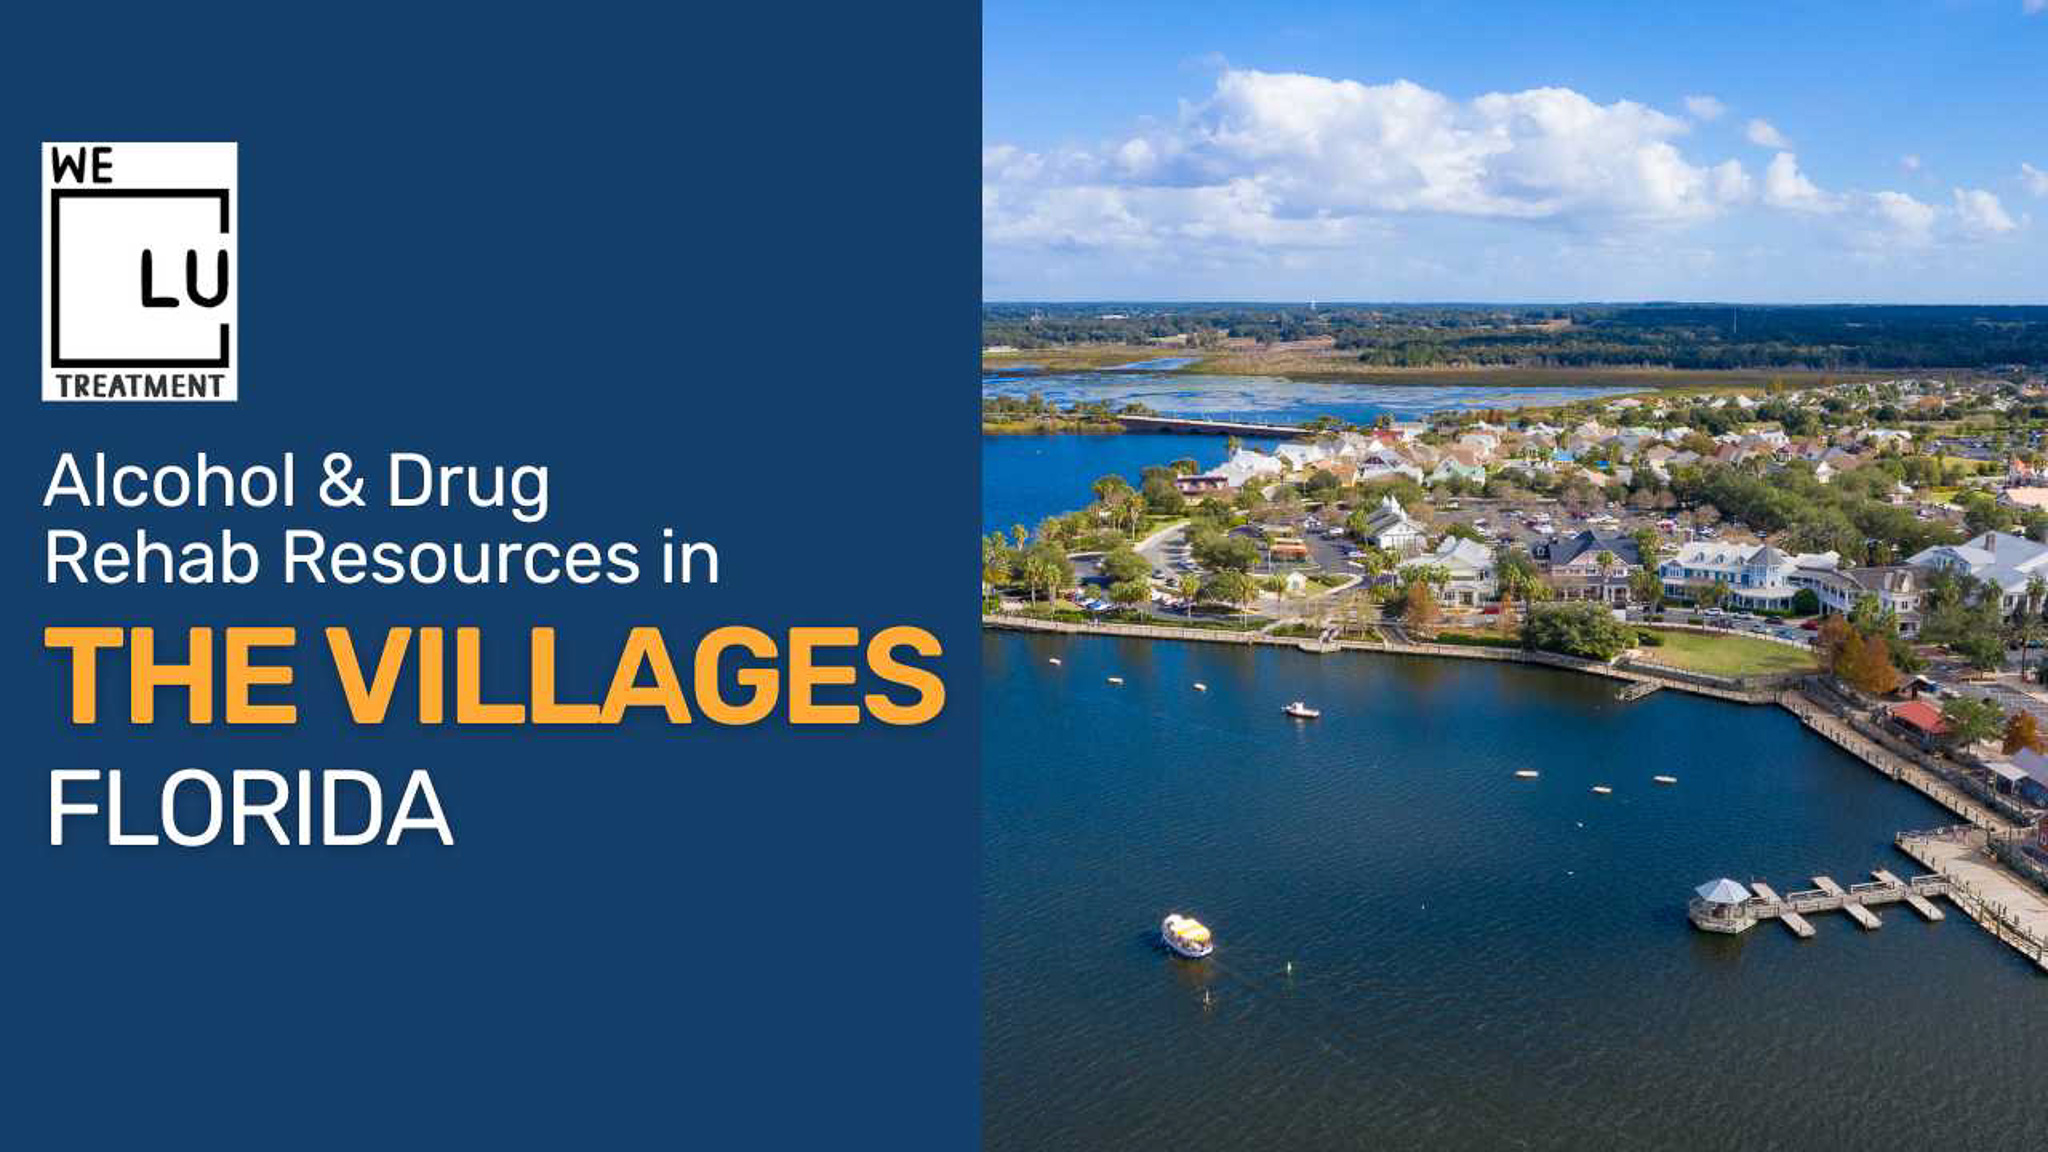 The Villages FL (SA) We Level Up treatment center for drug and alcohol rehab detox and mental health services - Image 1